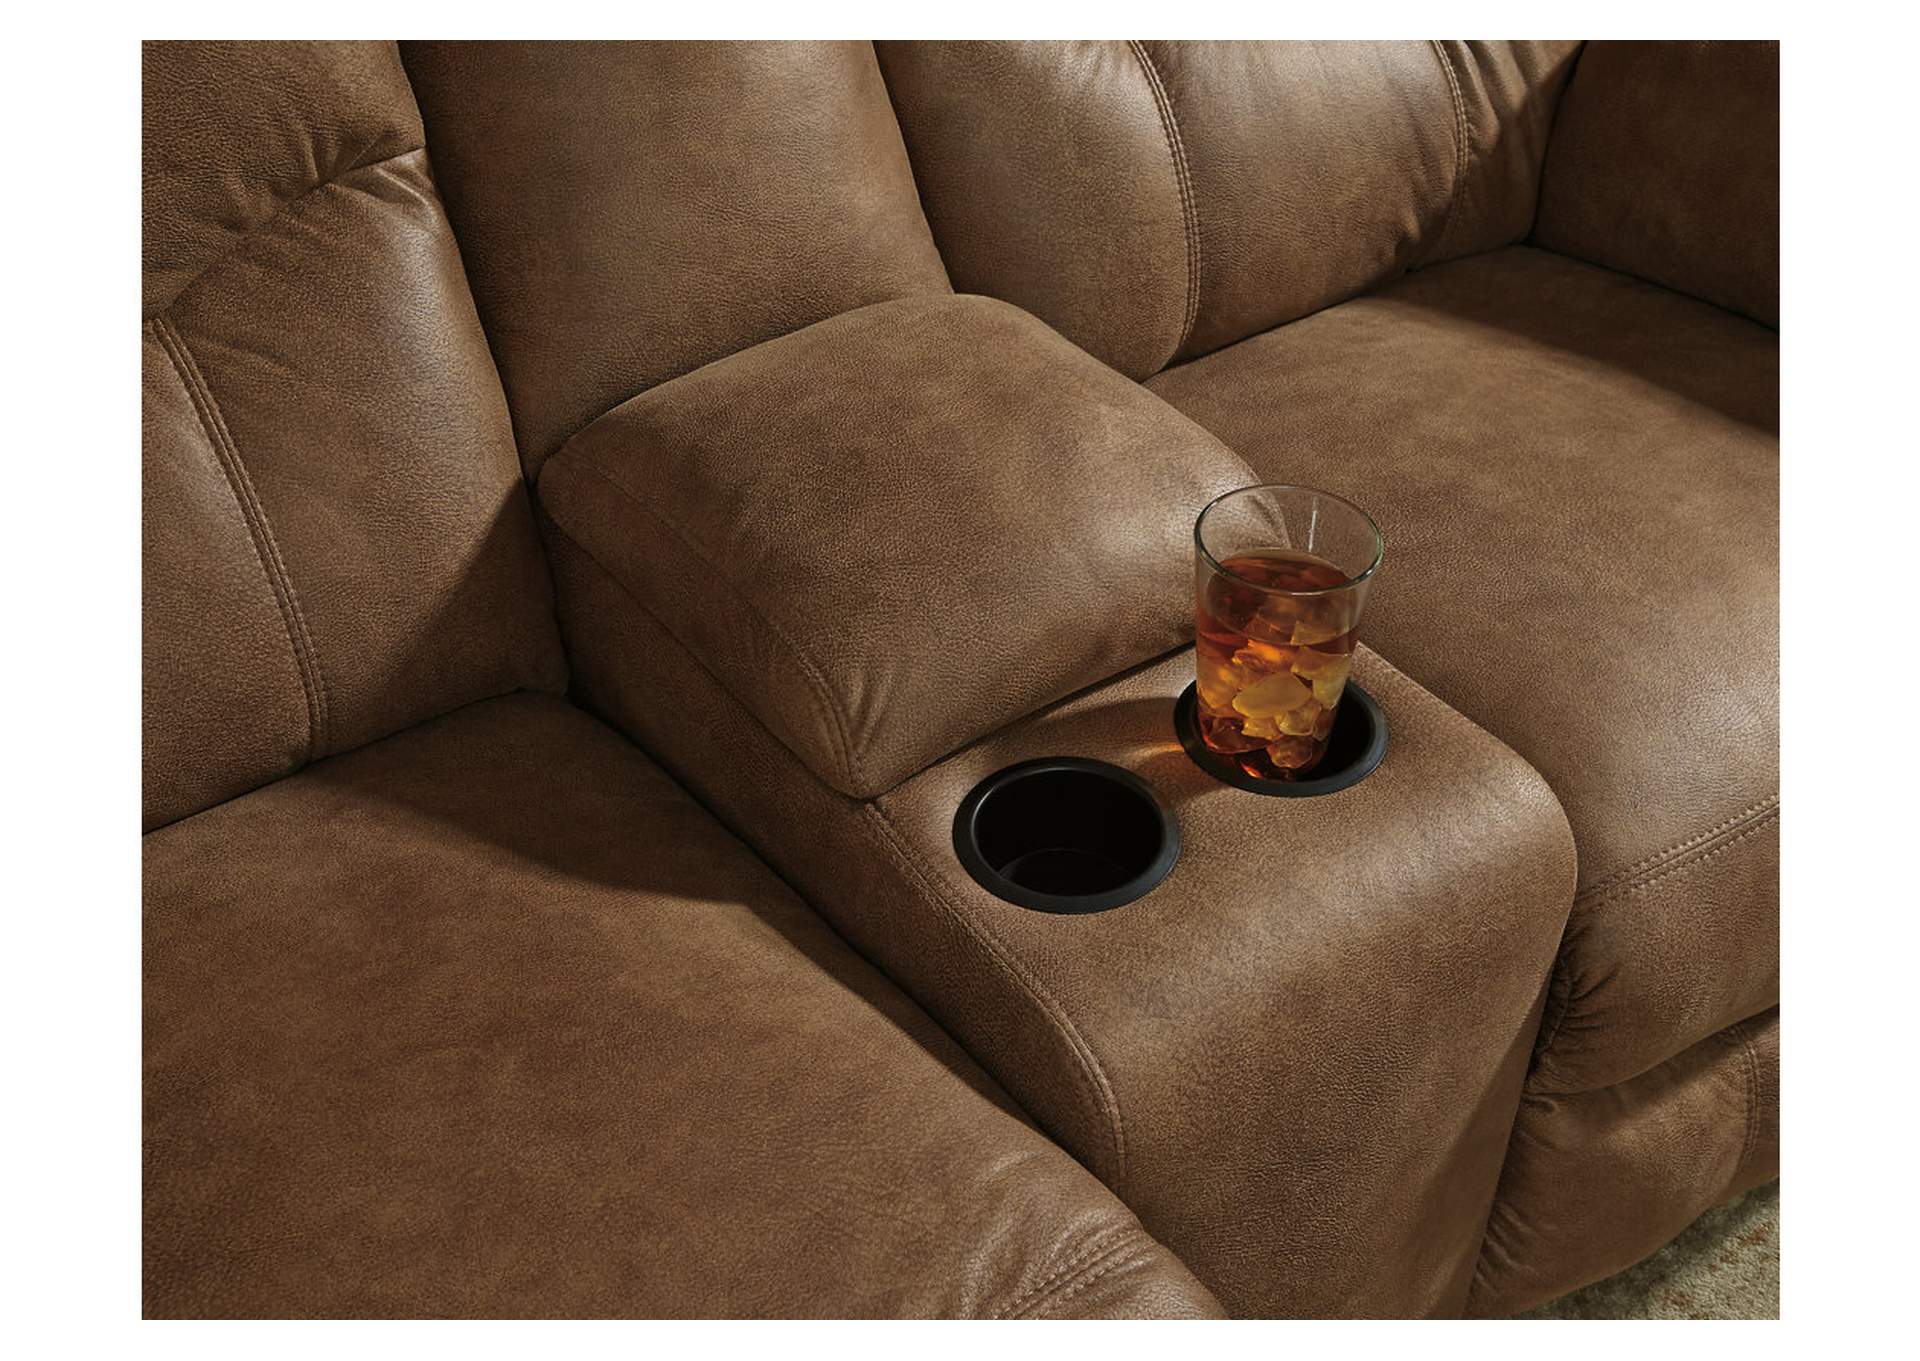 Boxberg Reclining Sofa, Loveseat and Recliner,Signature Design By Ashley